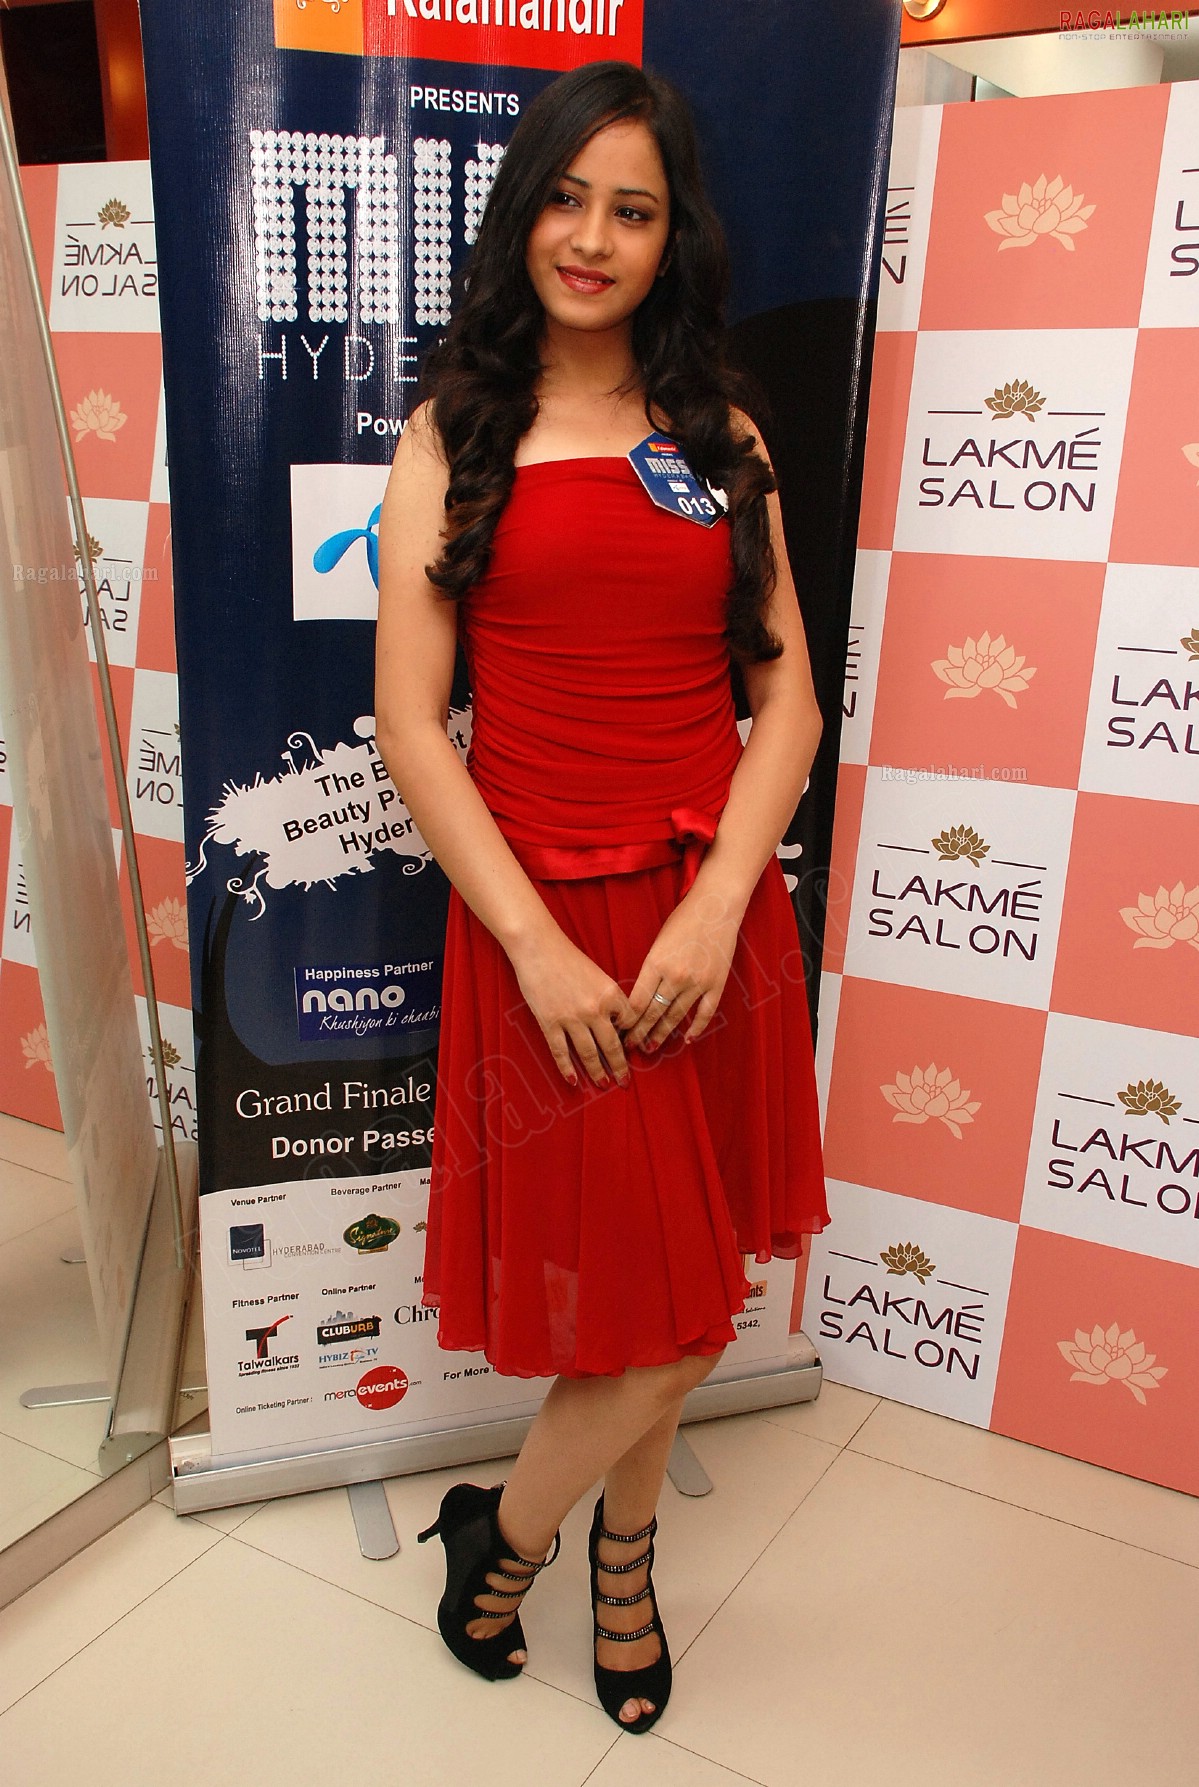 Makeup & Styling of Miss Hyderabad 2011 Finalists at Lakme Salon